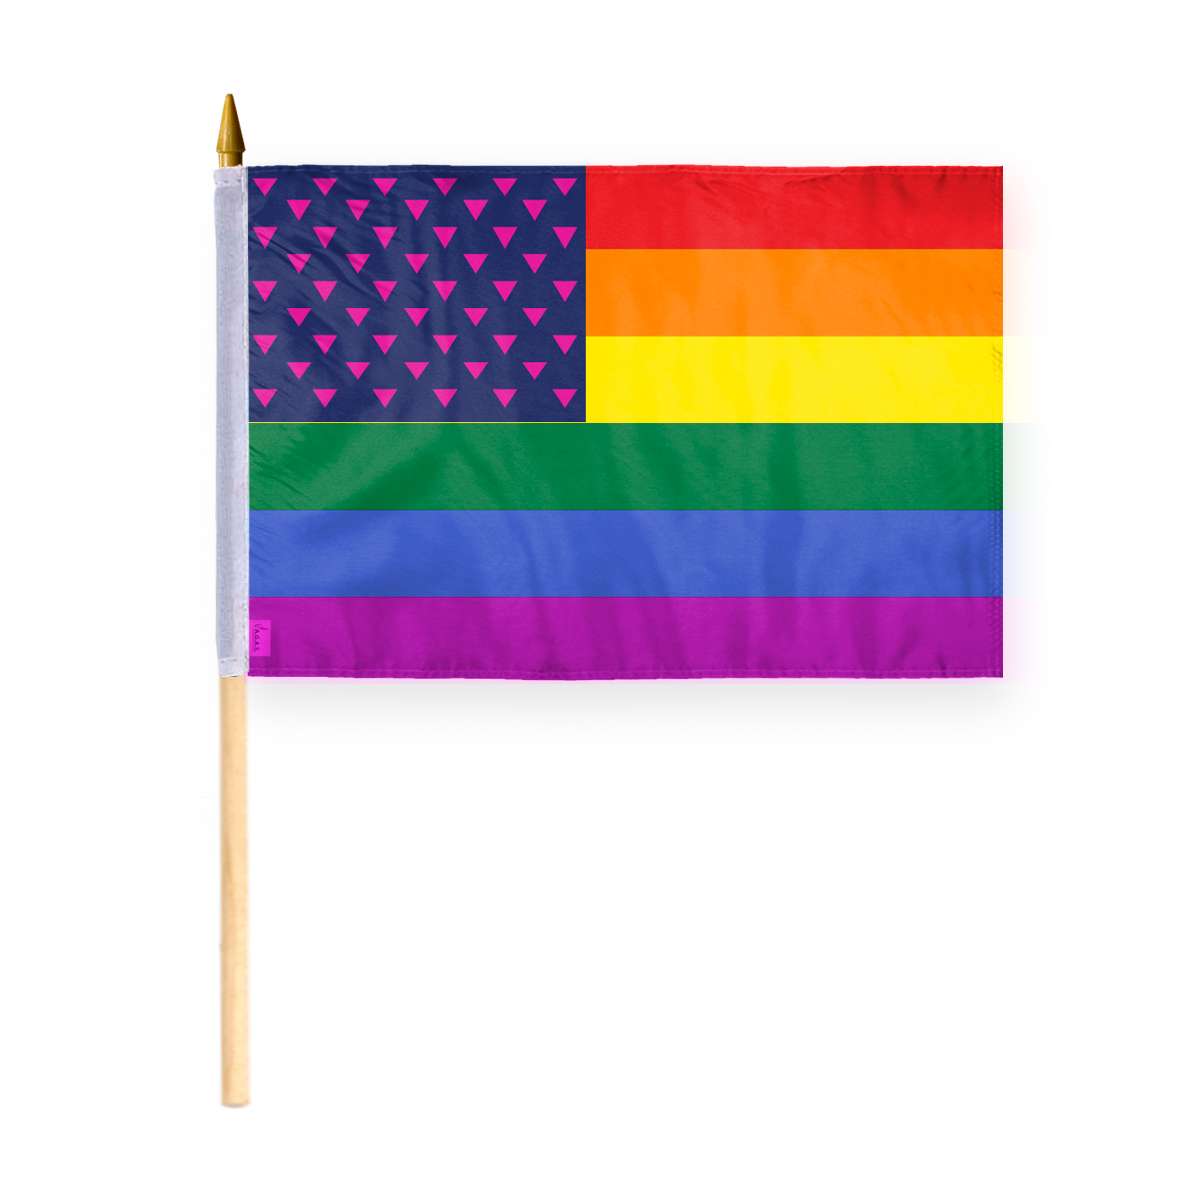 AGAS New Old Glory Triangles Pride Stick Flag 12x18 inch Flag